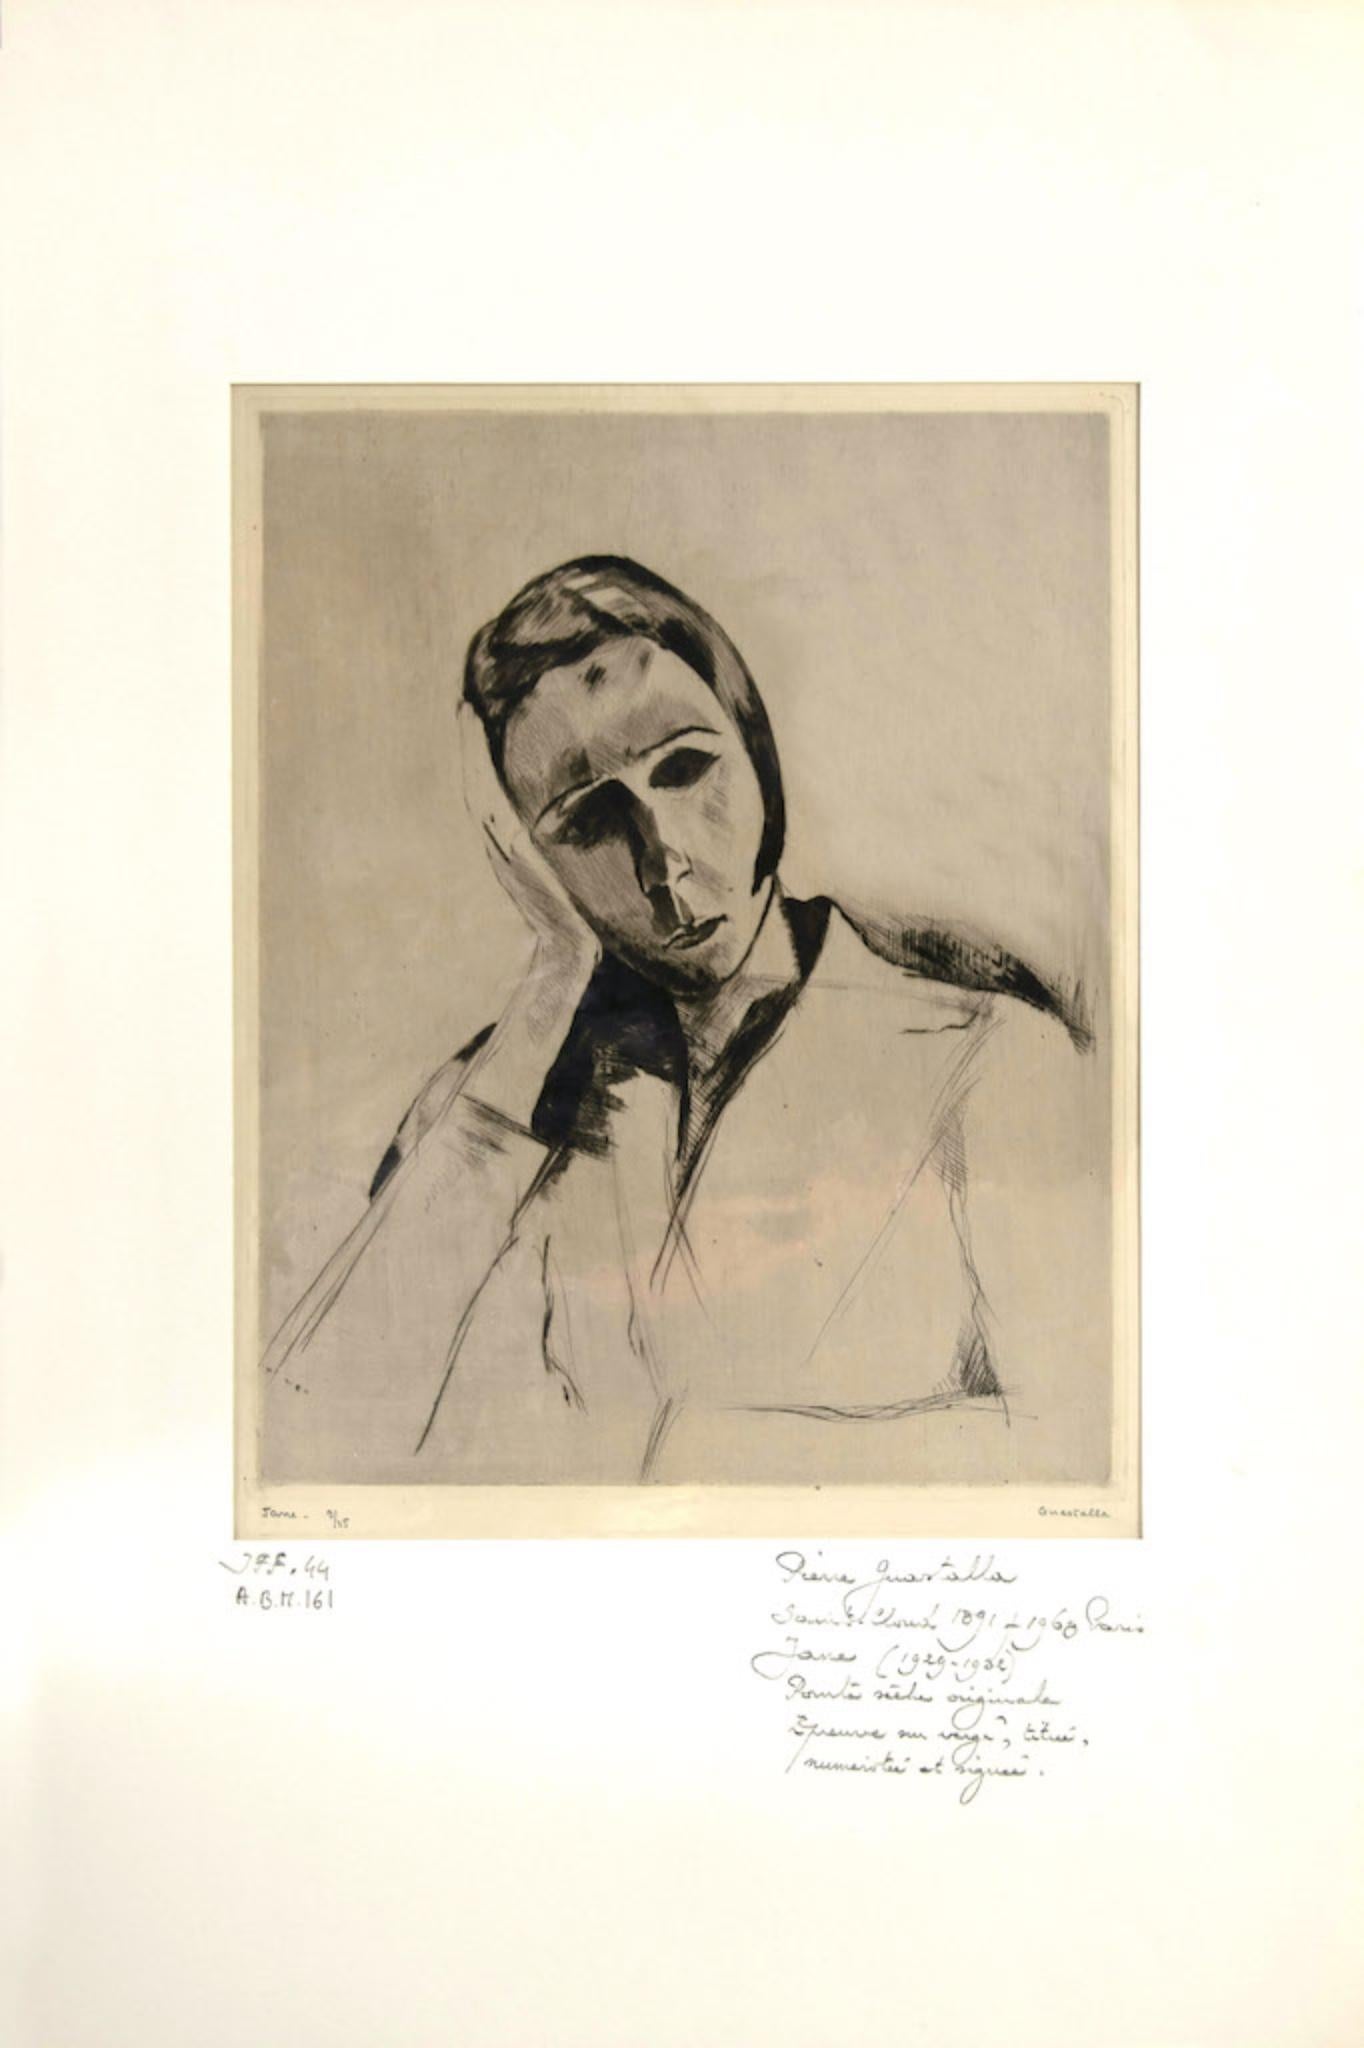 Portrait is an original etching on paper realized by Pierre Guastalla (1891-1968).

Hand-signed on the lower right in pencil. Numbered, edition of 9/25 pints, on the lower left in pencil.

The state of preservation is very good.

The artwork